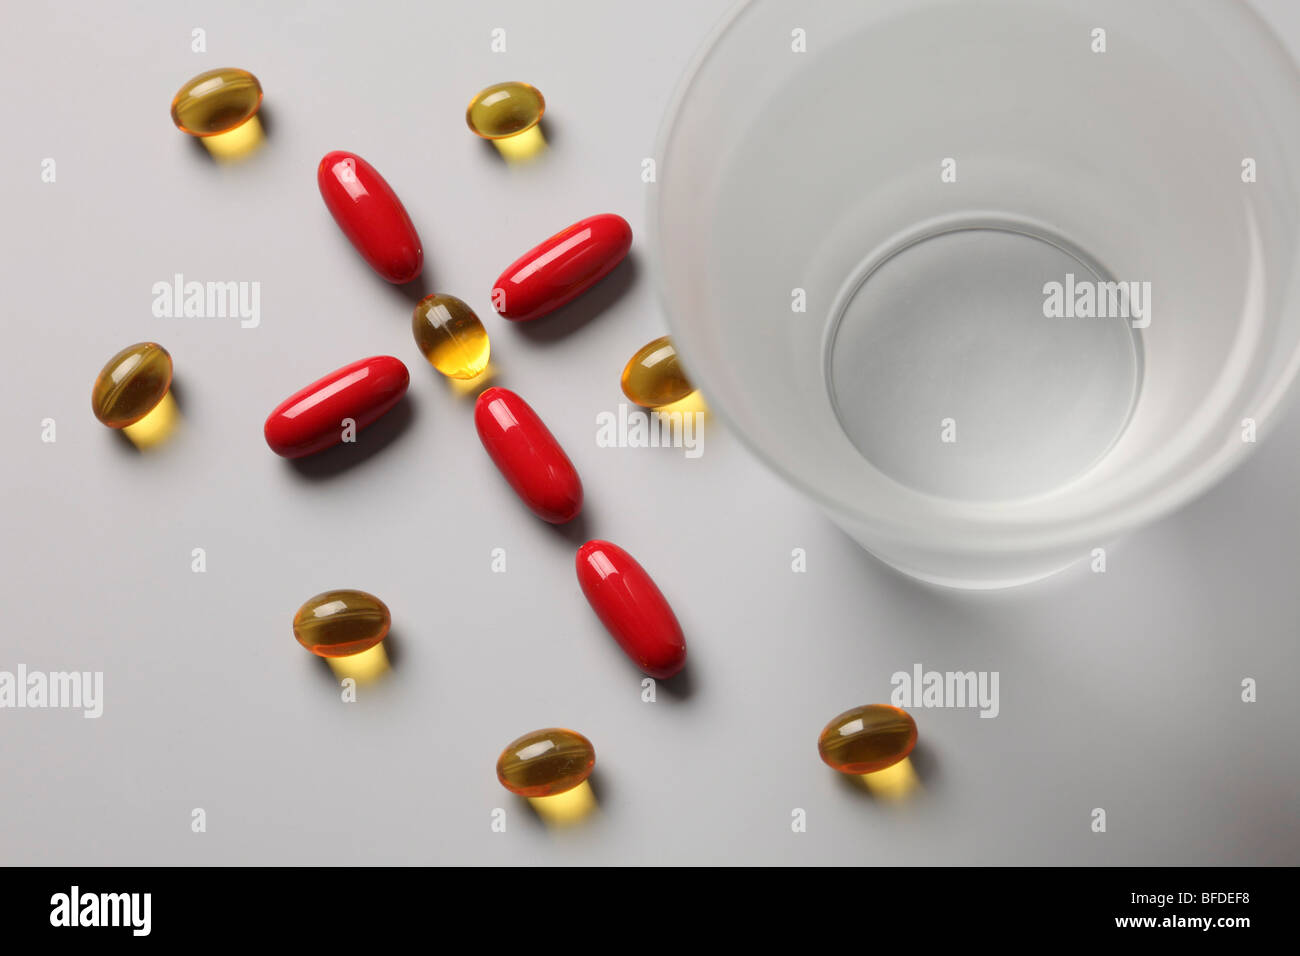 Pills forming a cross next to a glass of water Stock Photo